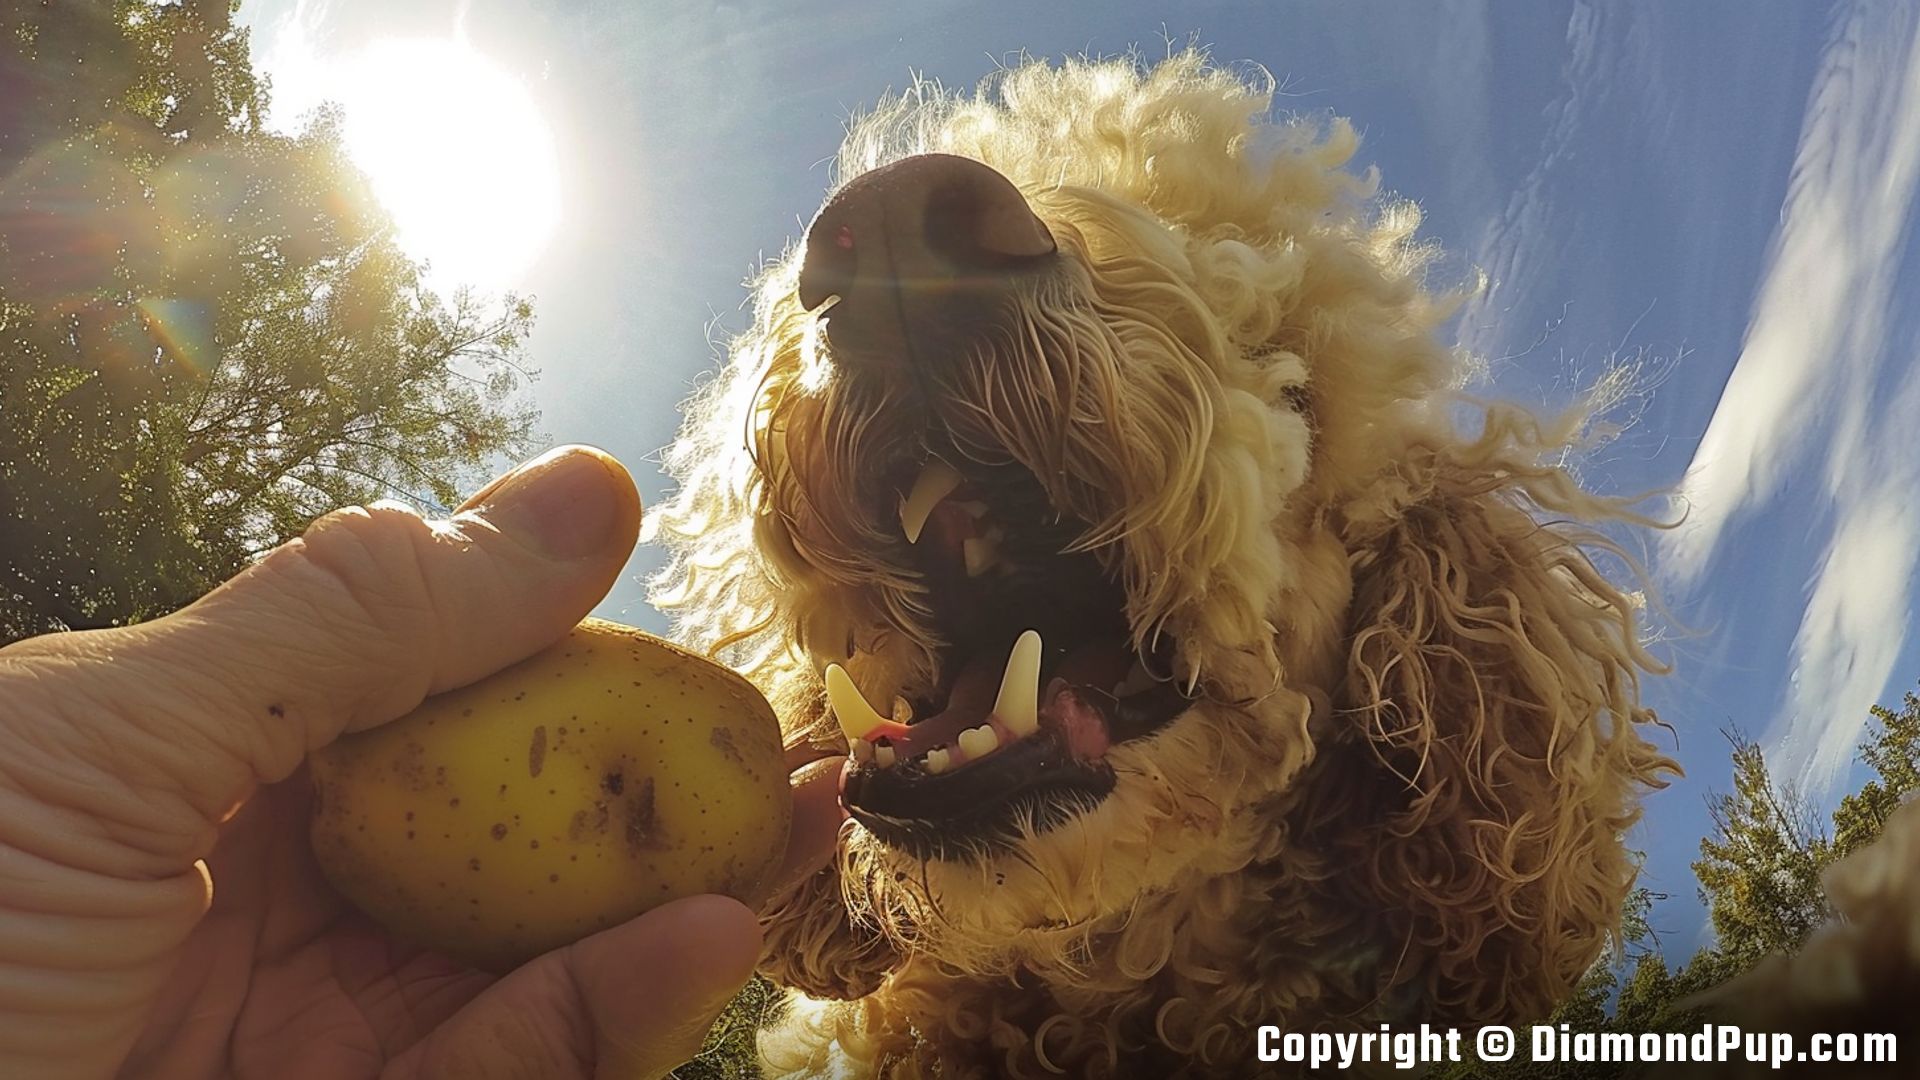 Photograph of a Cute Poodle Snacking on Potato